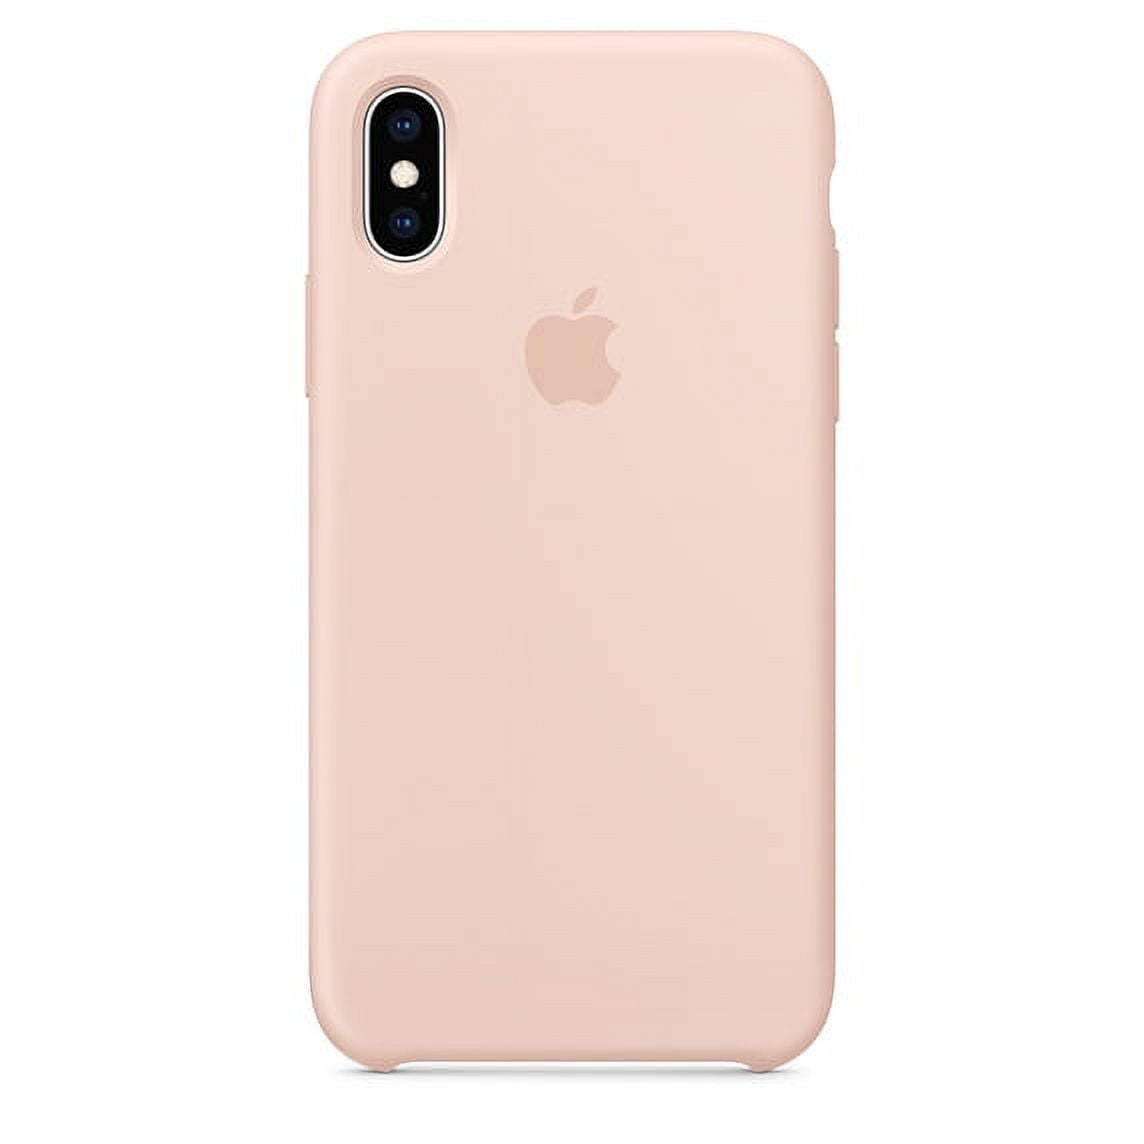 Apple Silicone Case for iPhone 6s - Pink Sand - Walmart.com